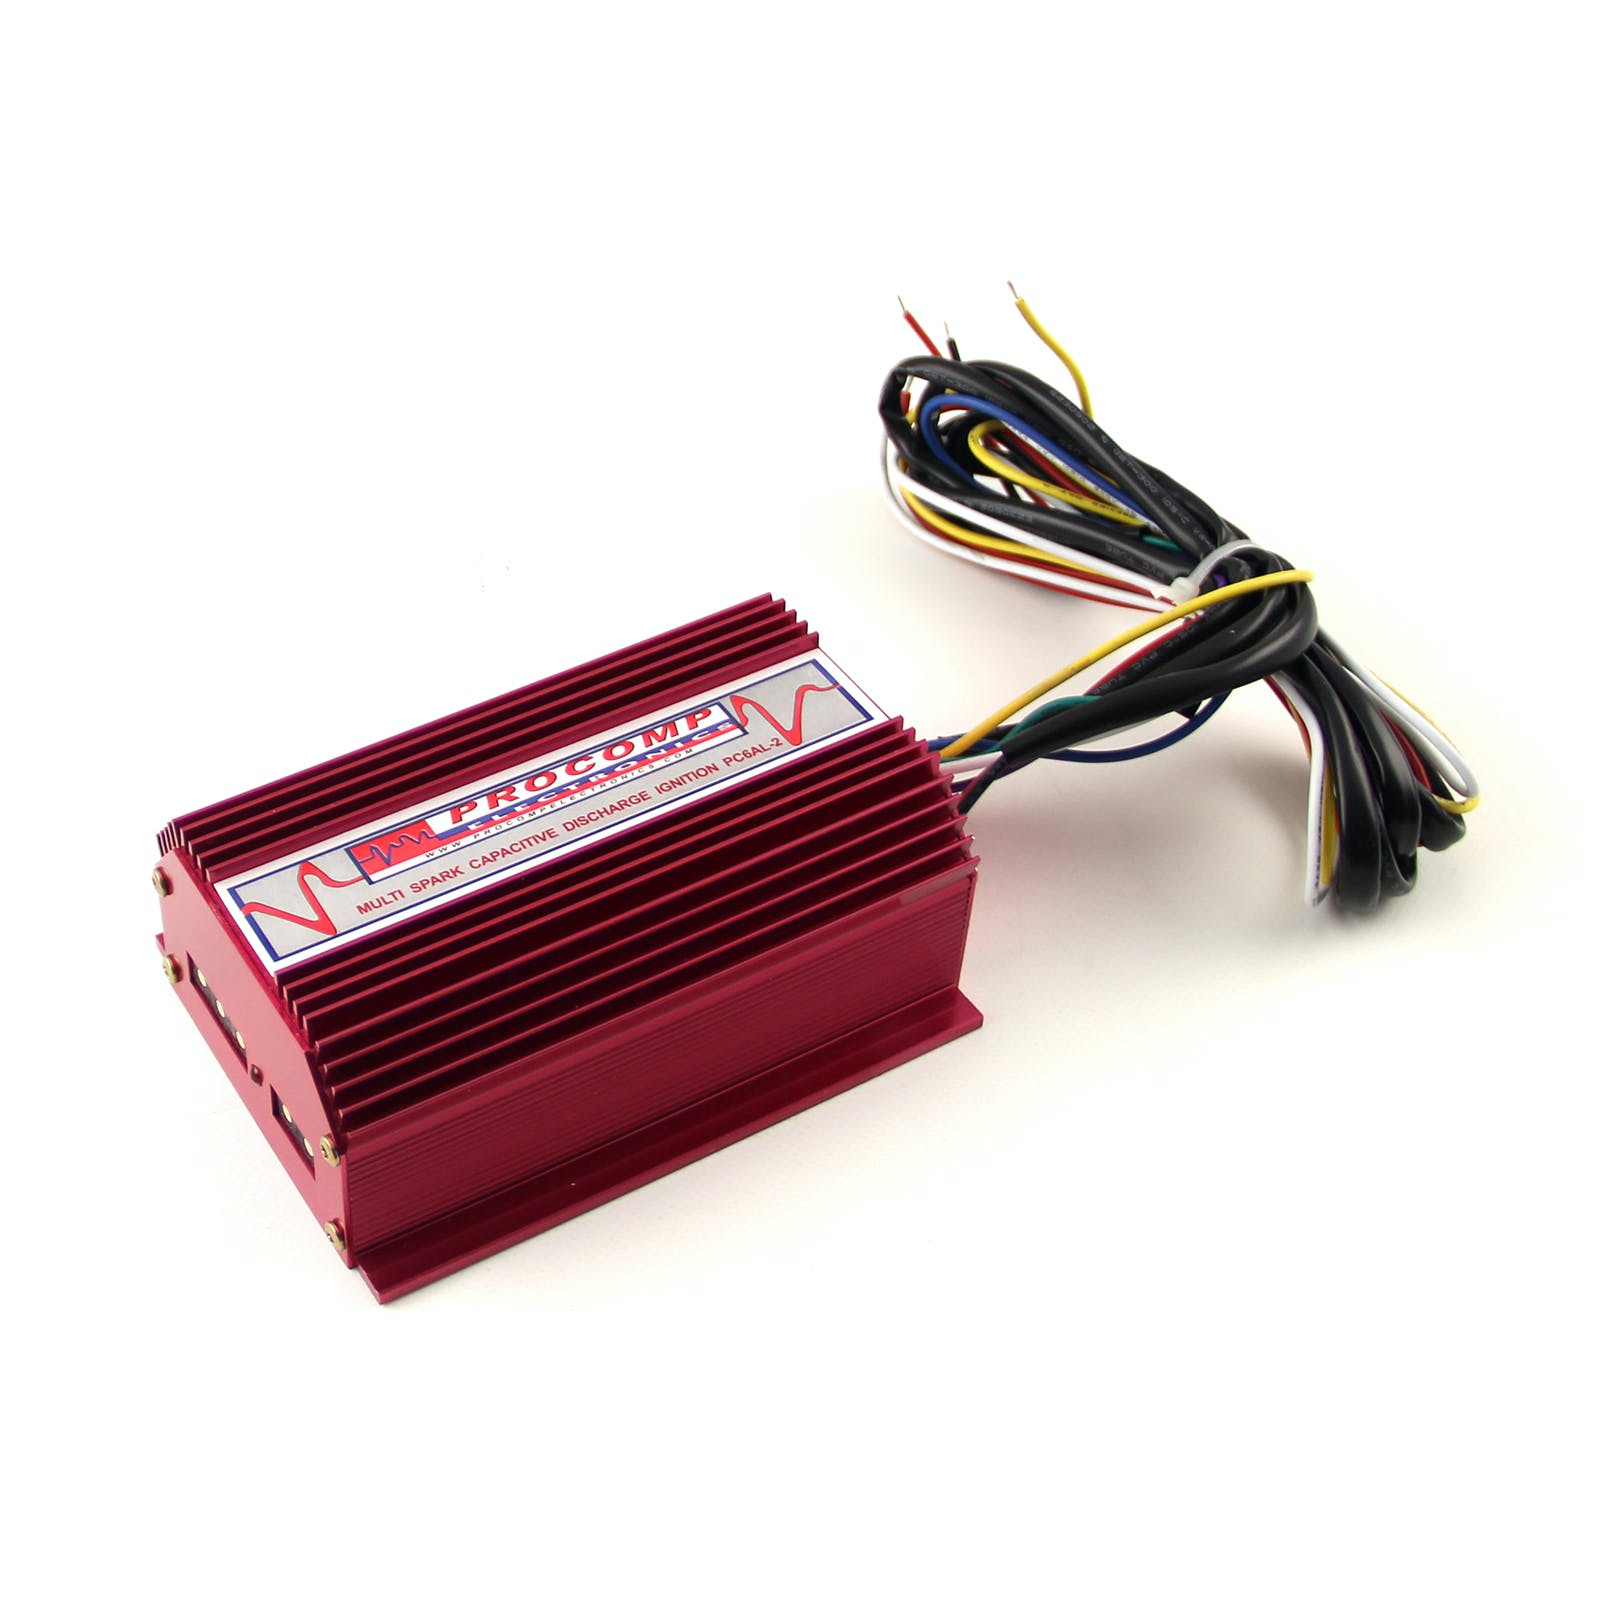 Speedmaster PCE380.1007 Multiple Spark CDI 6AL Ignition Box 2 Rev Lim (2x Rotary switches) Red